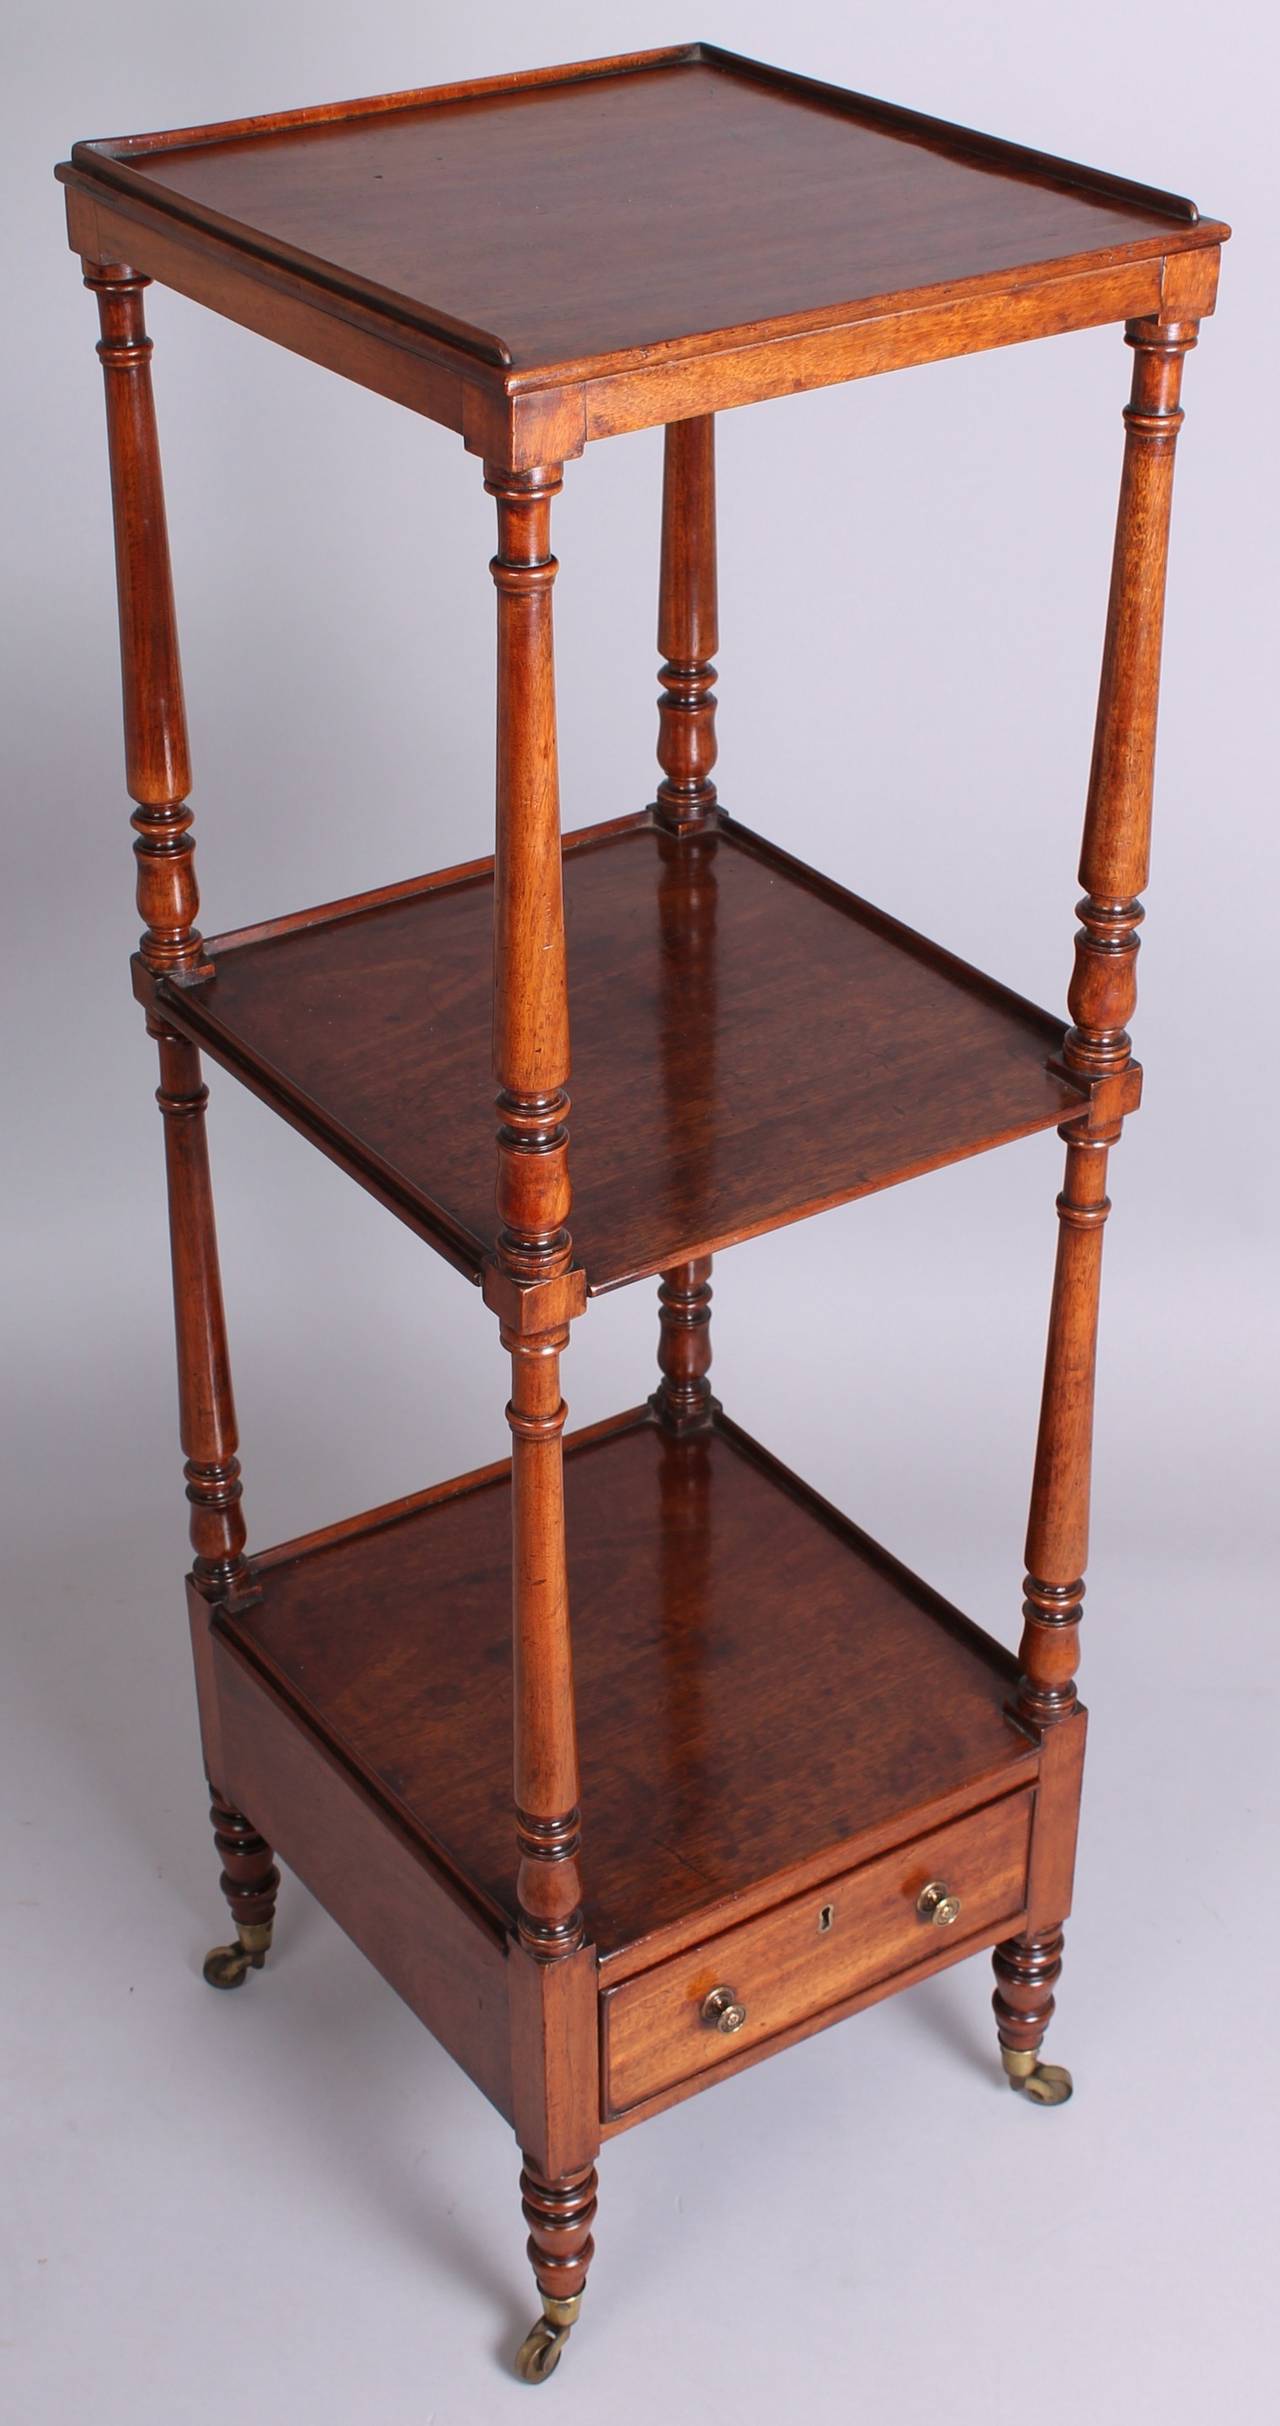 A late George III period mahogany small whatnot; the almost-square galleried shelves mounted on turned baluster-shaped supports and legs with brass cup-castors; the base fitted with a mahogany-lined drawer. Circa 1815